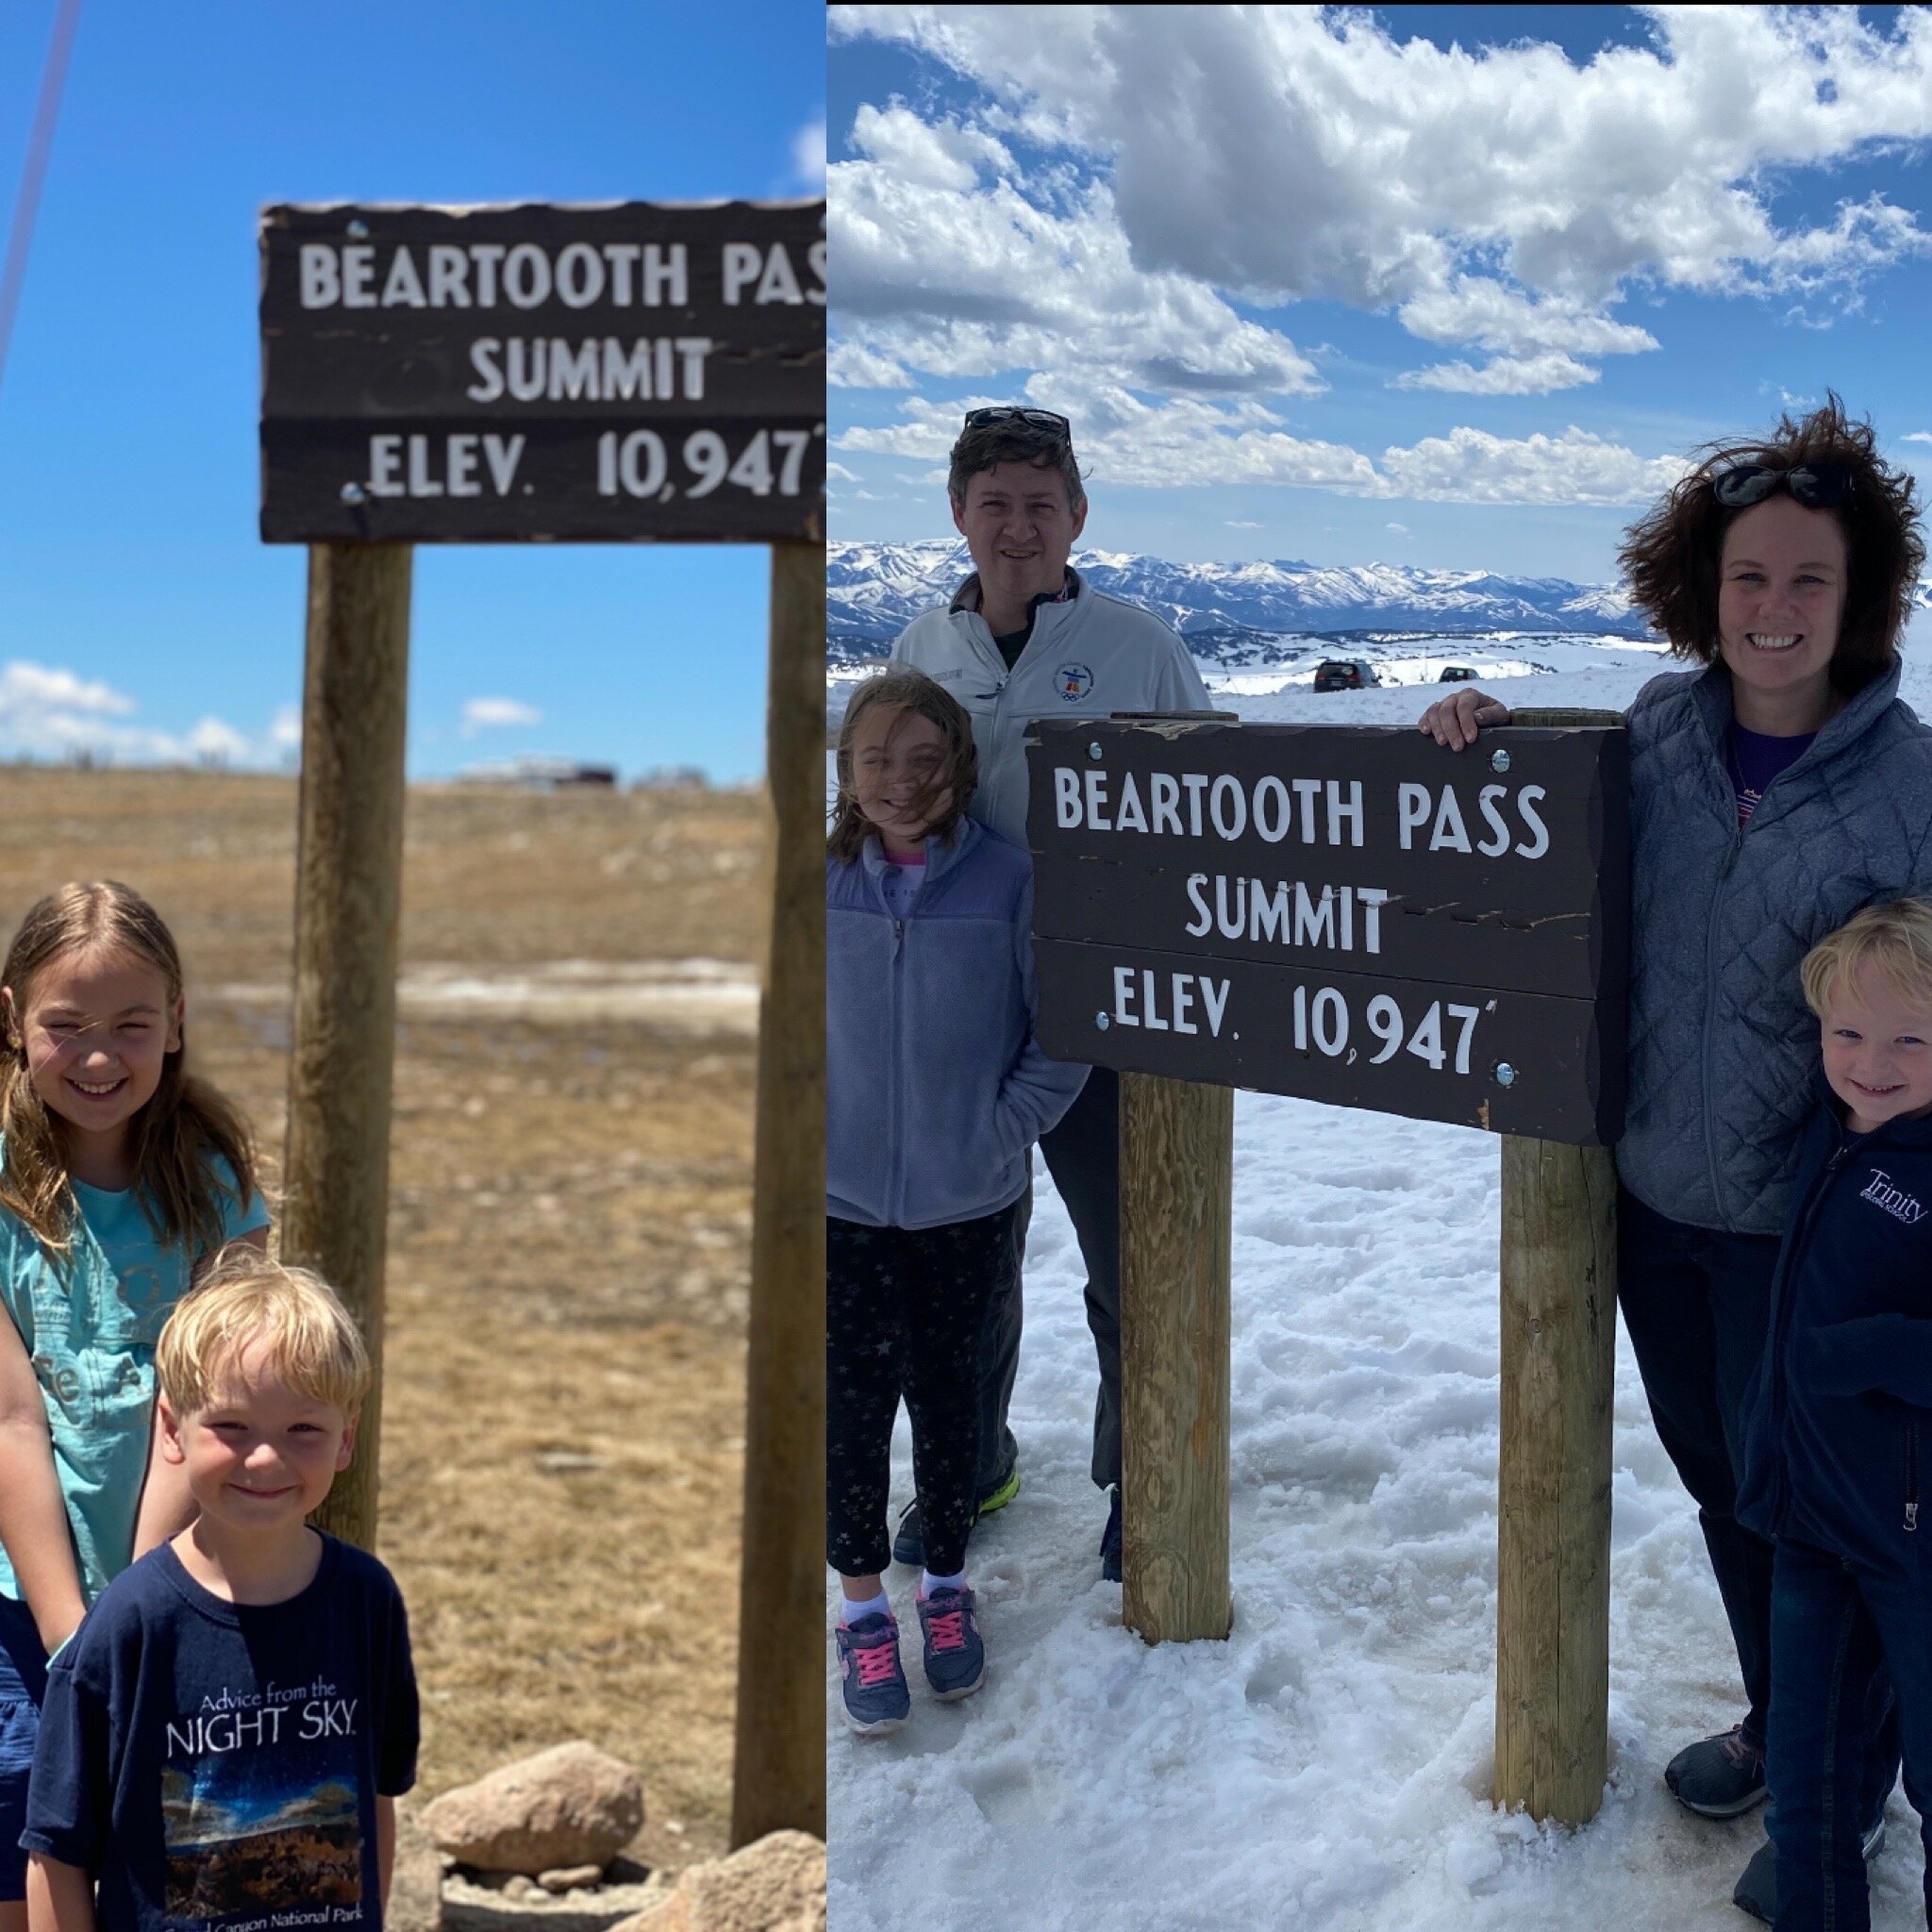 Comparisson of the kids (and us) at the Beartooth Pass Summit SAME SIGN.  On the left was last Summer, June 23, 2020.  This year on the right (standing on top of a few feet of snow!), May 29, 2021. (First photo by Karen Boudreaux, Second photo by friendly German couple now living in Minnesota… Thank you!)